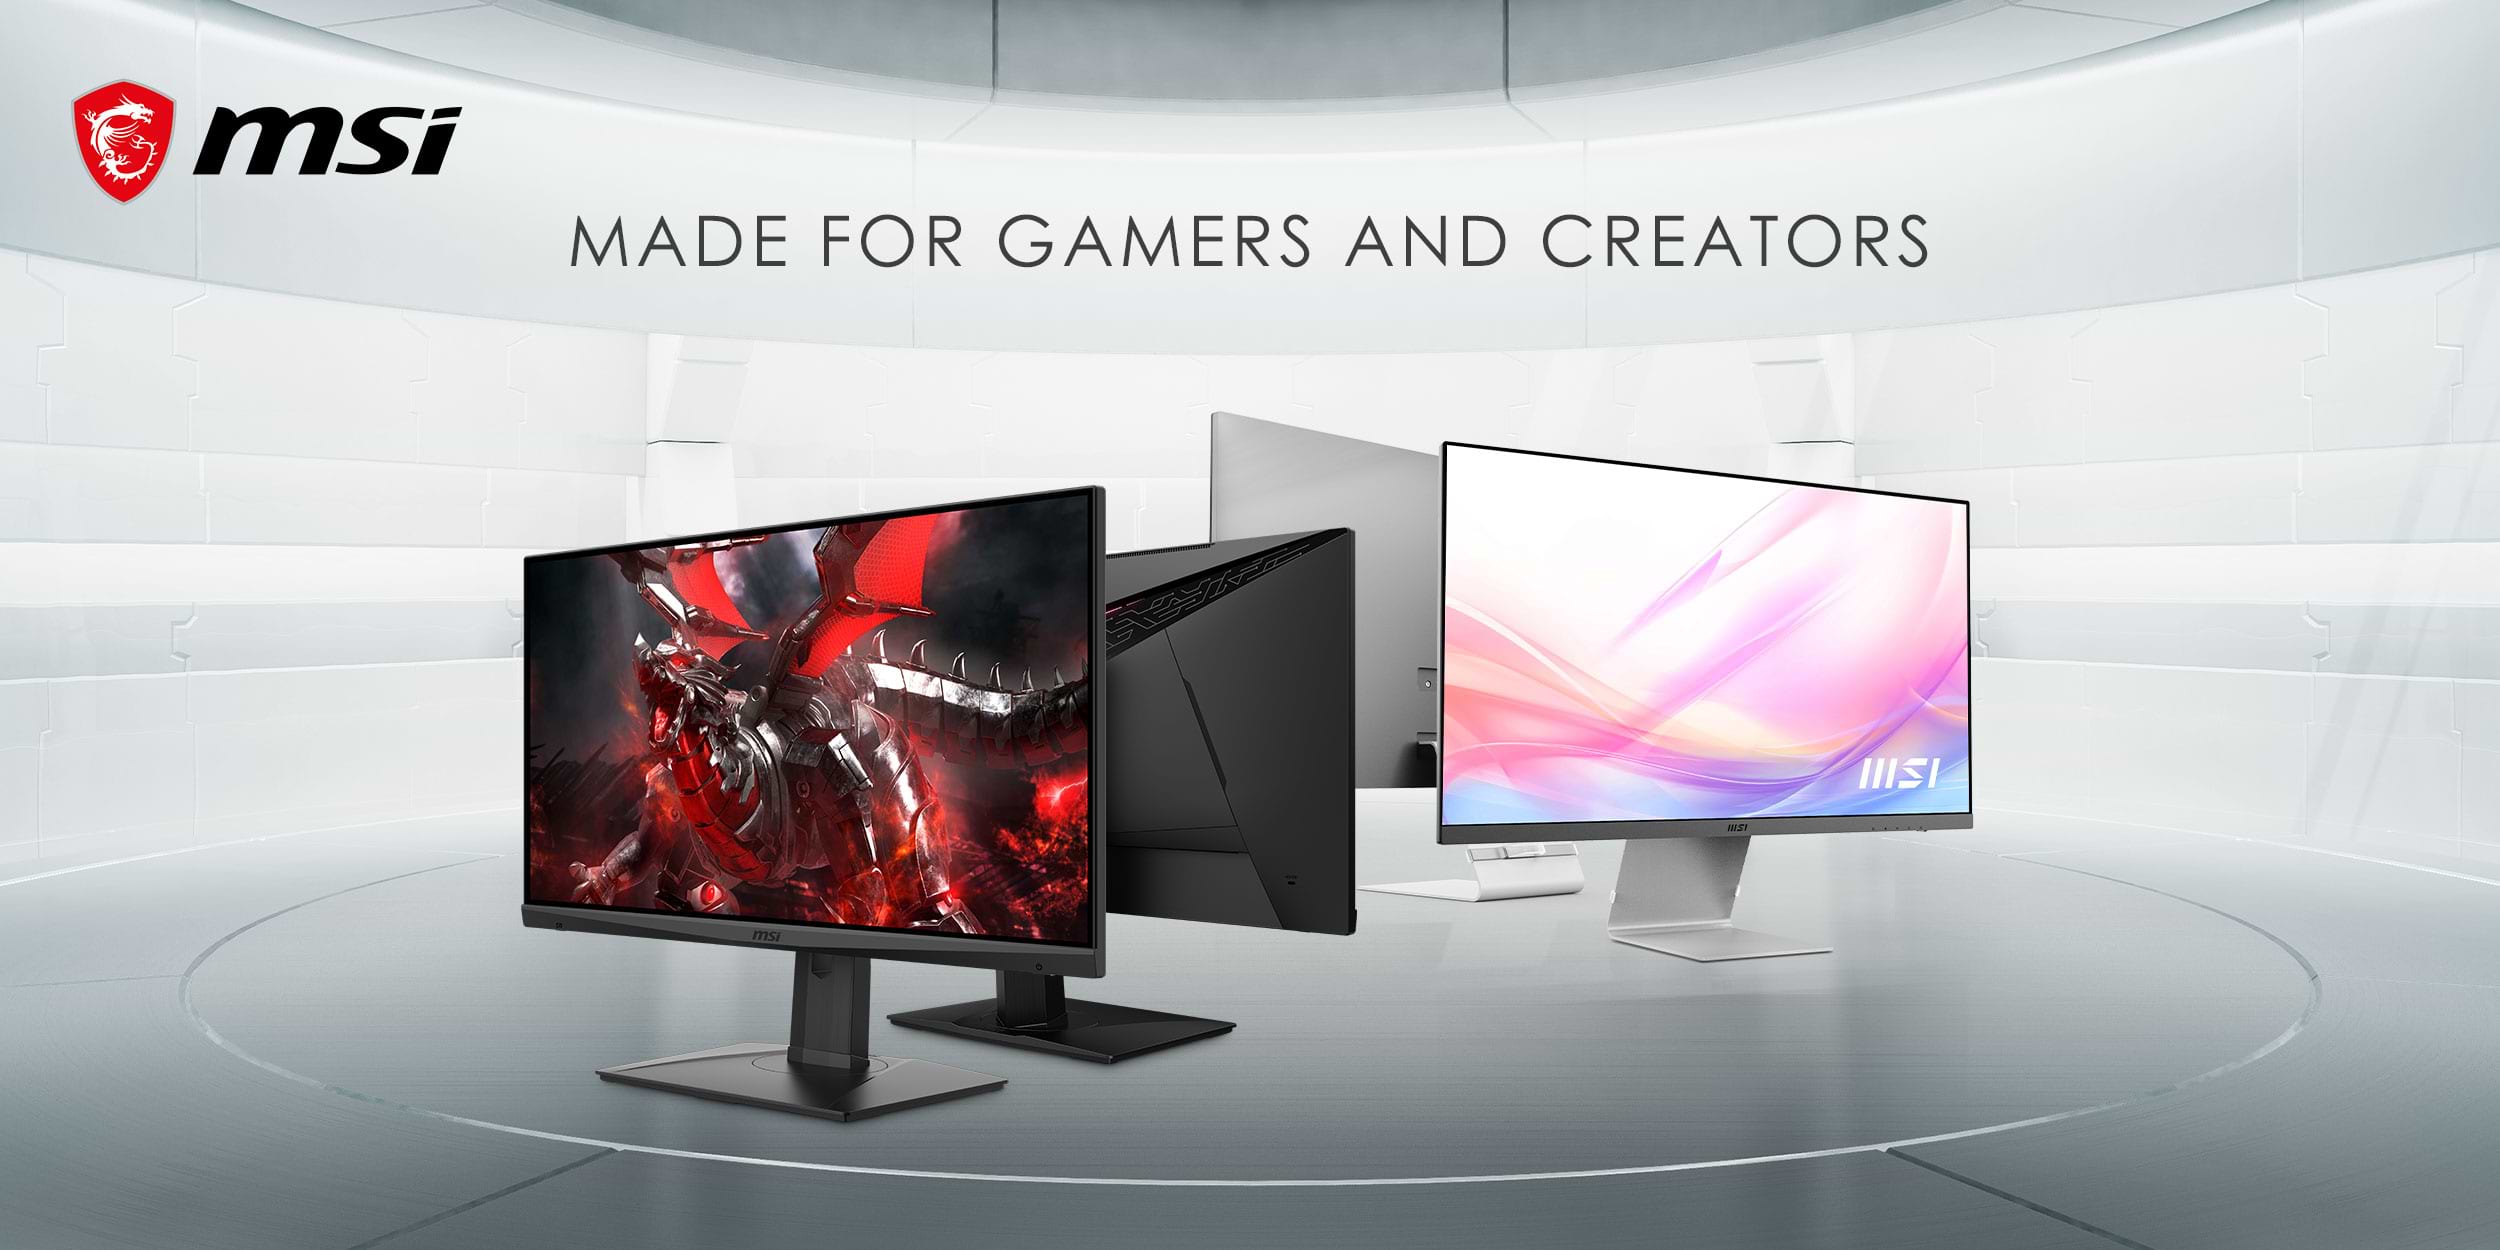 MSI Made for gamers and creators